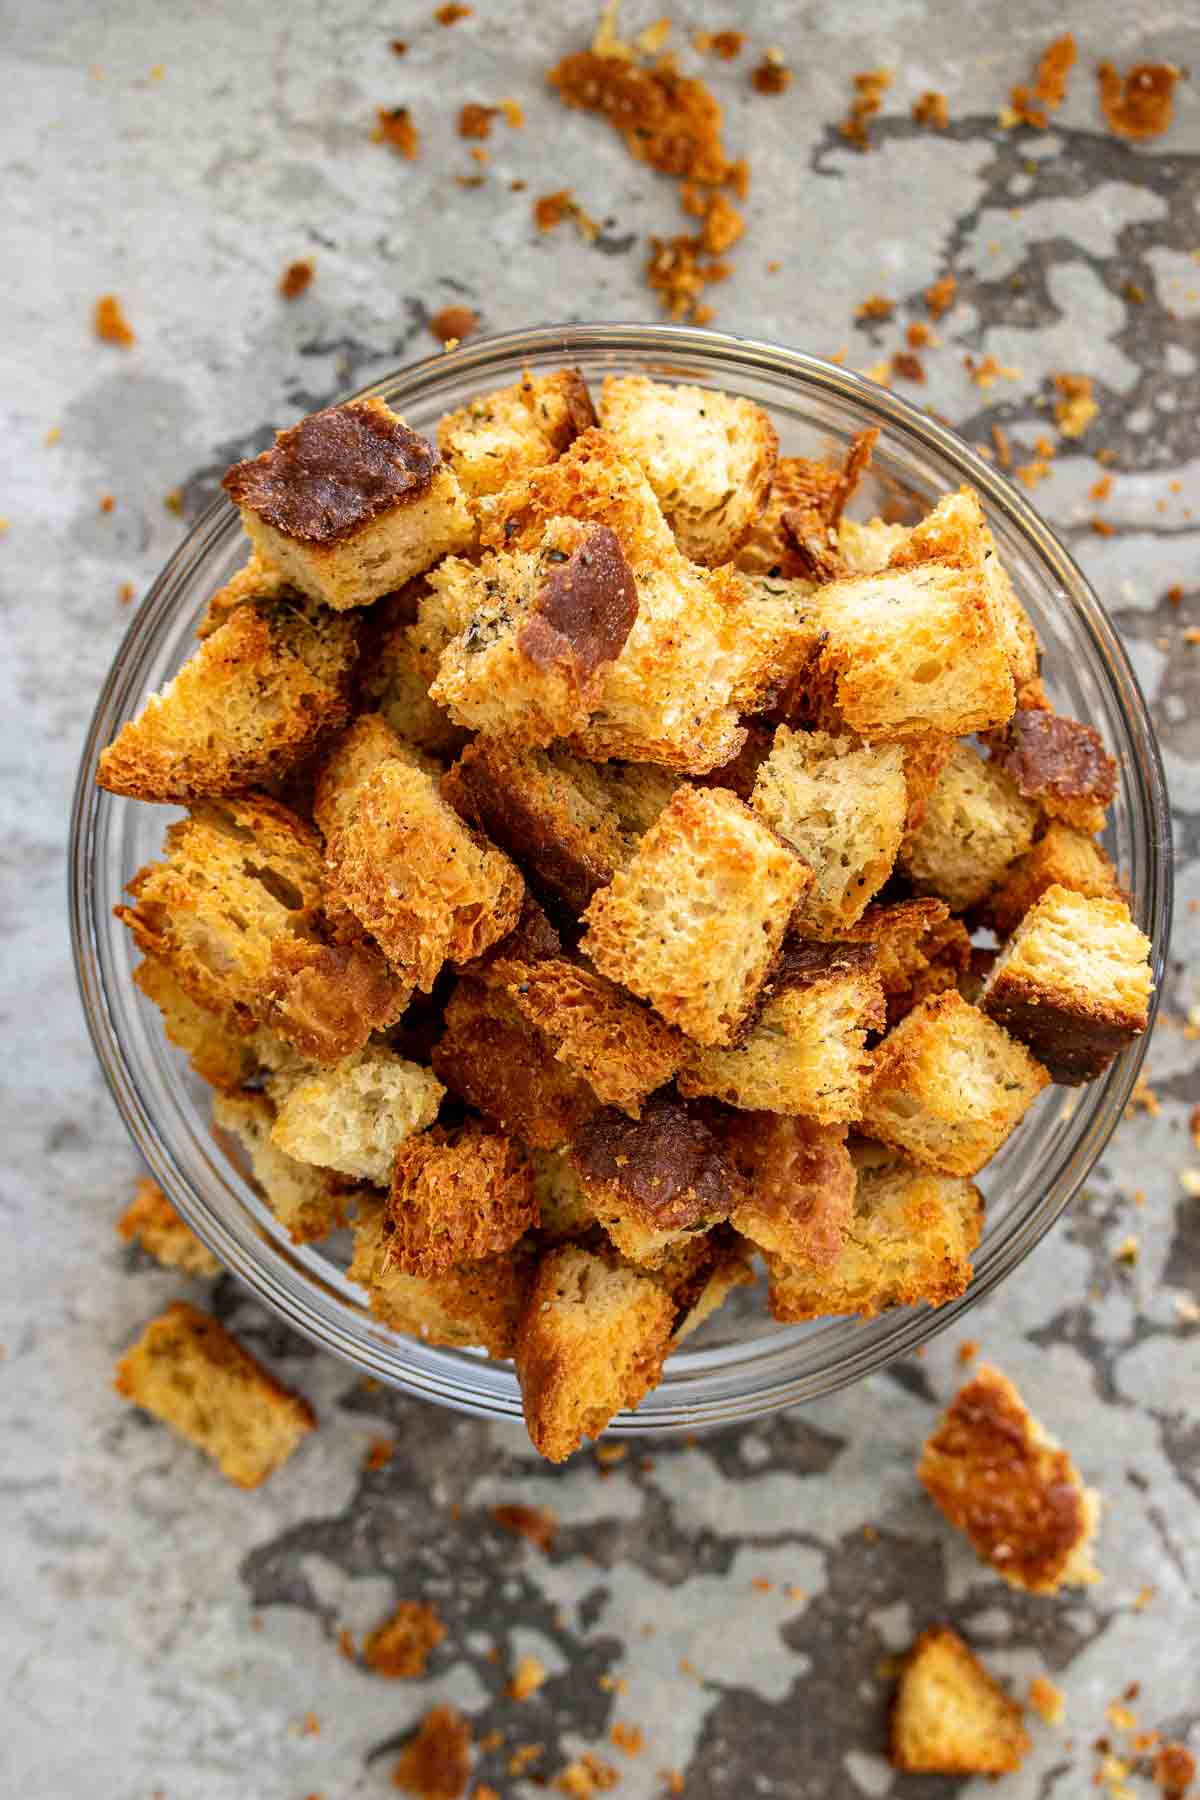 Sourdough croutons in a glass bowl.